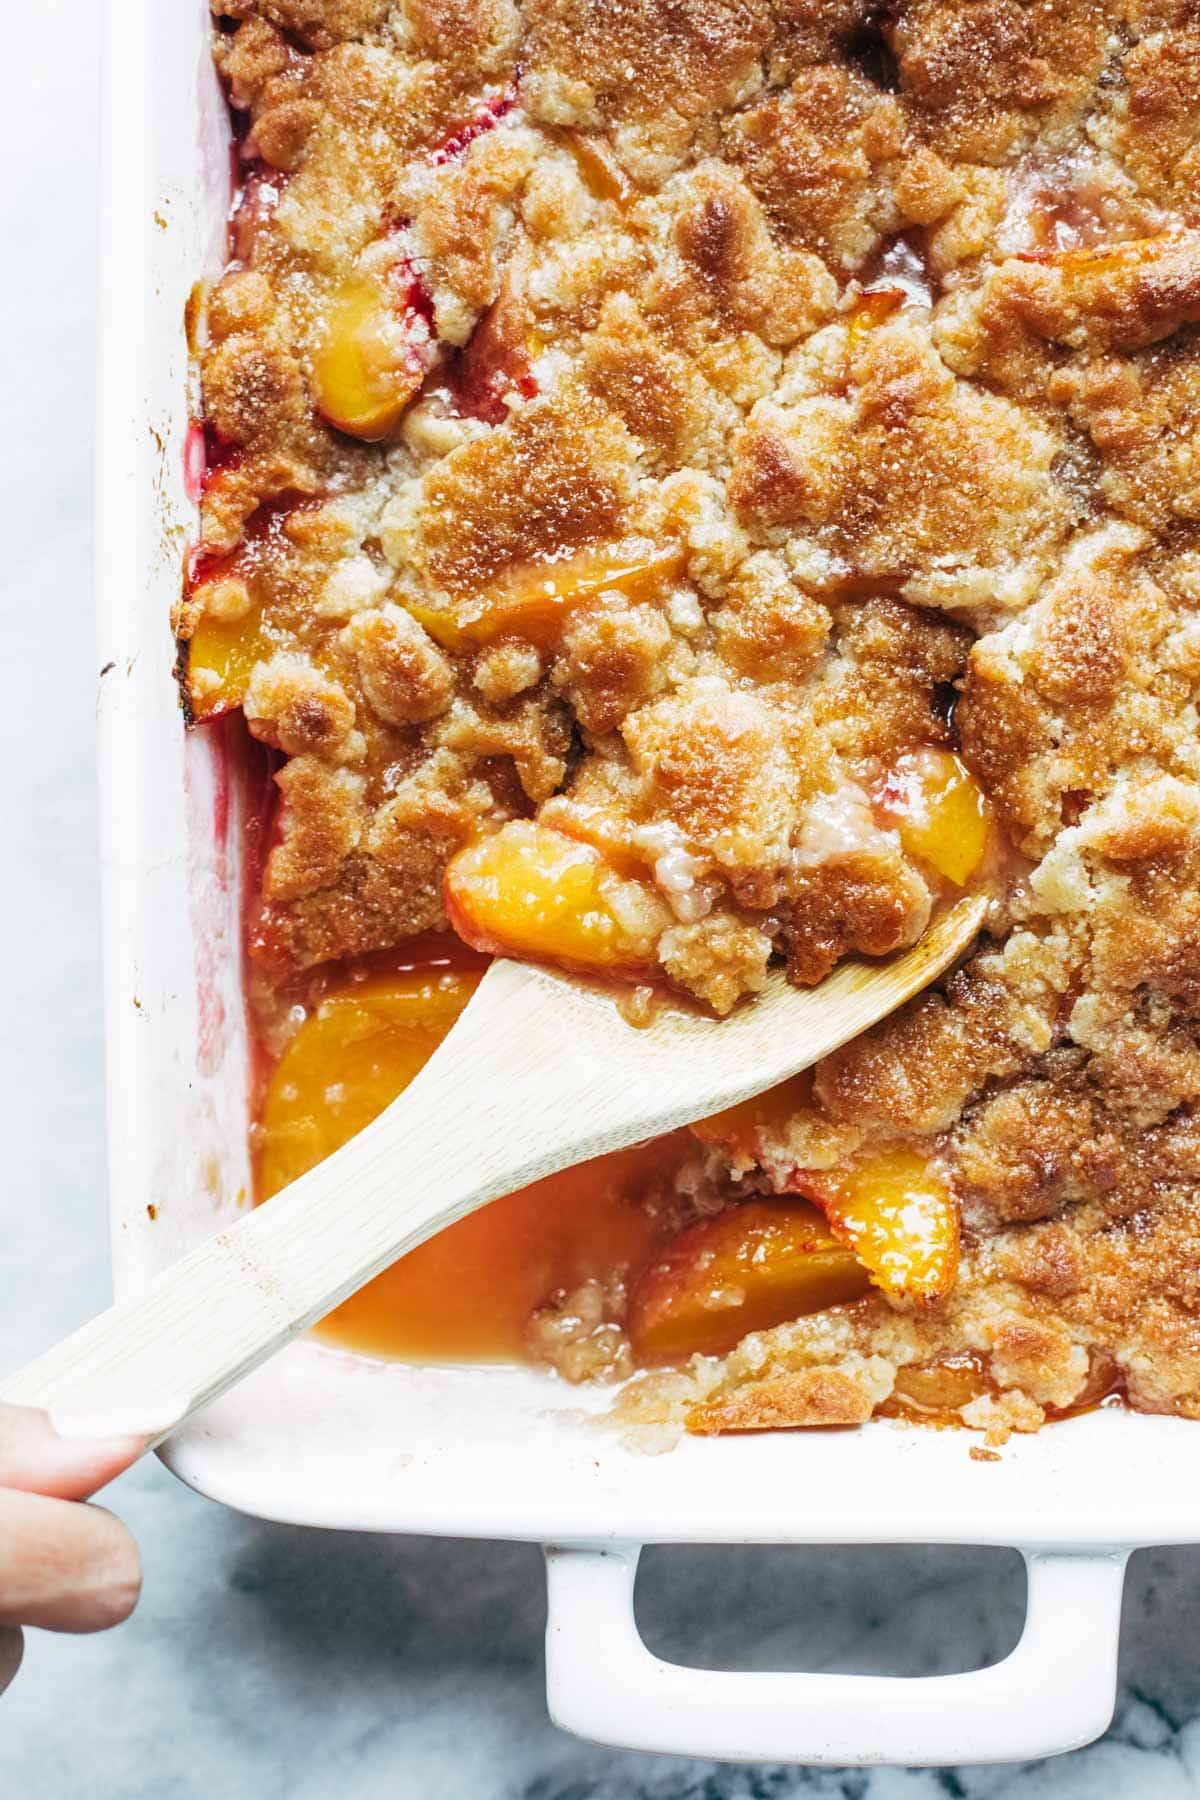 Peach cobbler in a pan with wooden spoon.